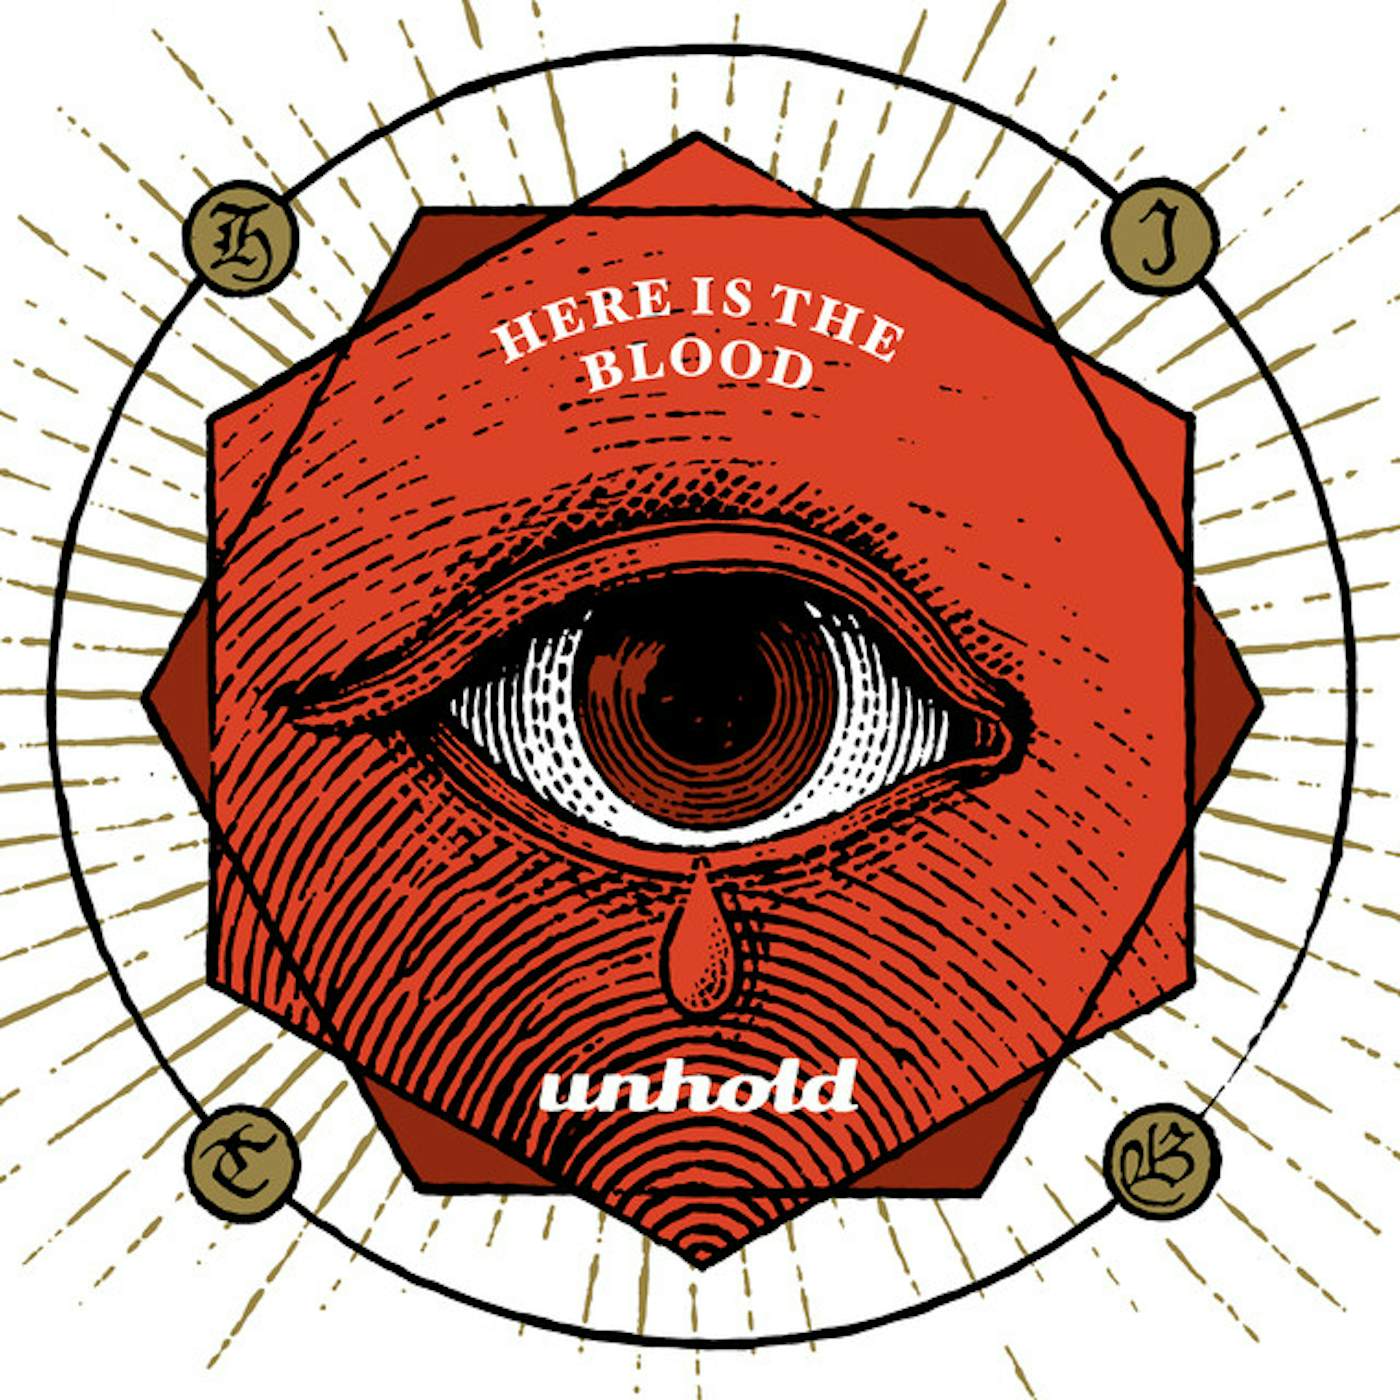 Unhold Here is the Blood Vinyl Record